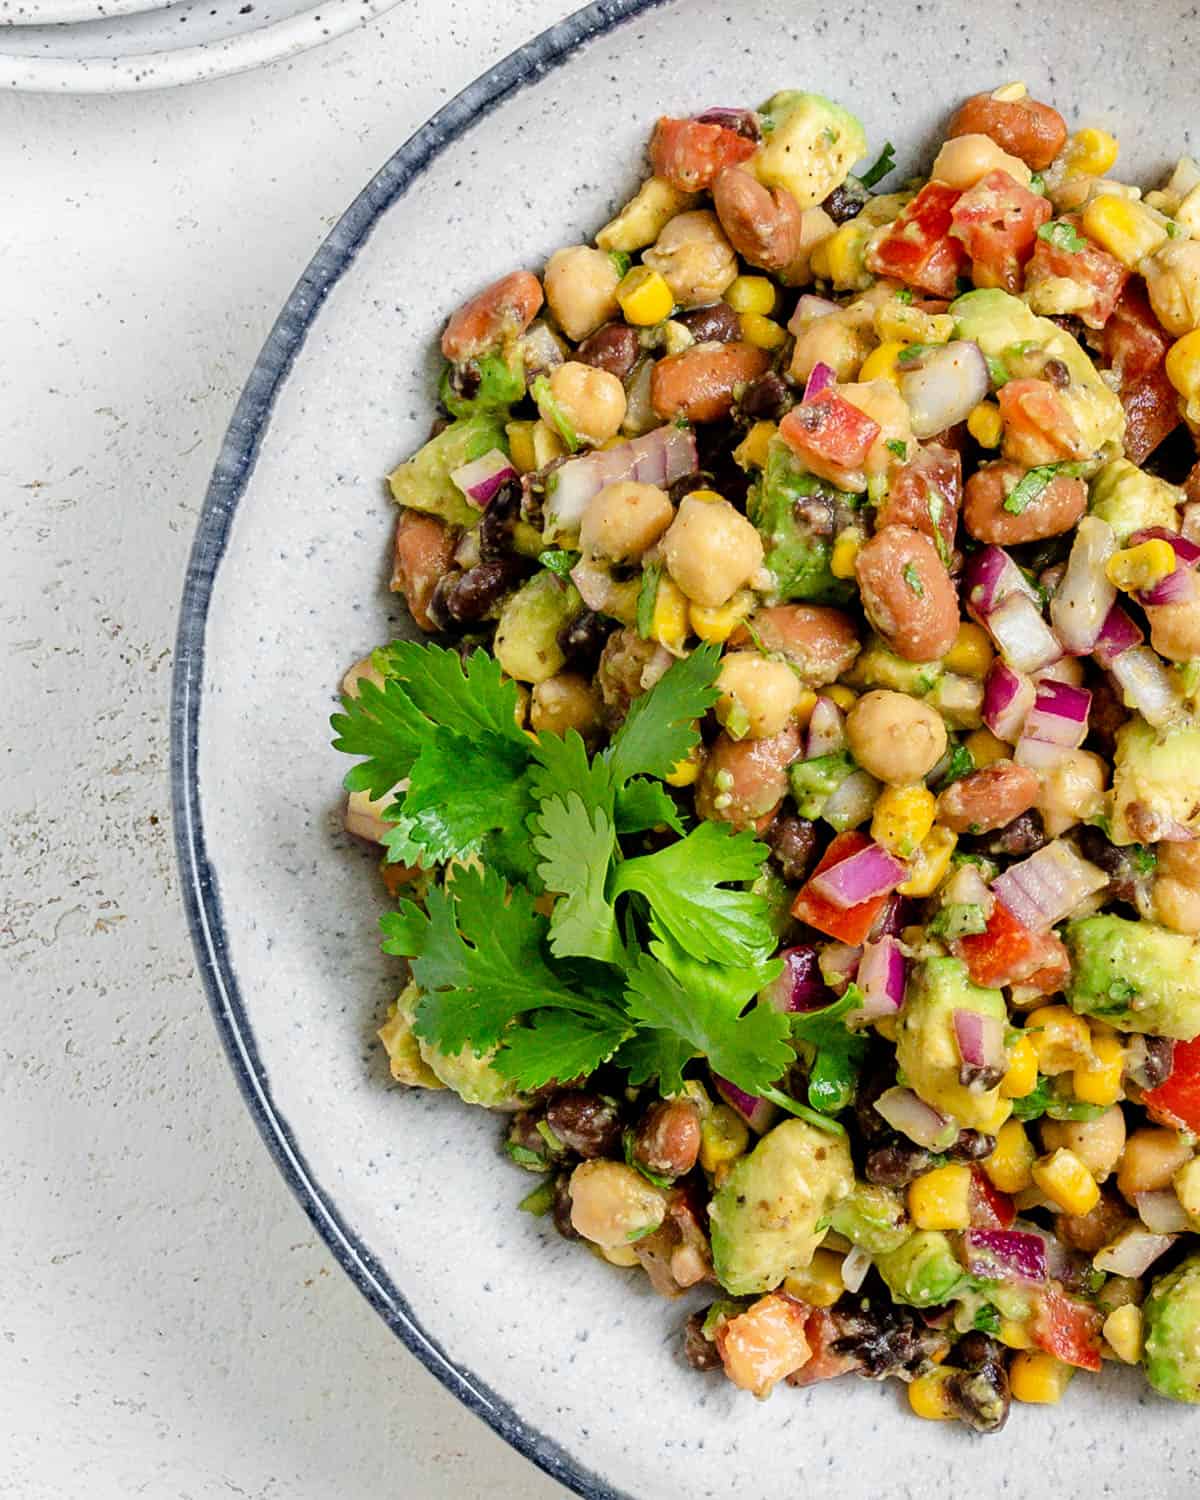 completed Texas Caviar [Avocado Corn and Bean Salad] in a white plate against a light background